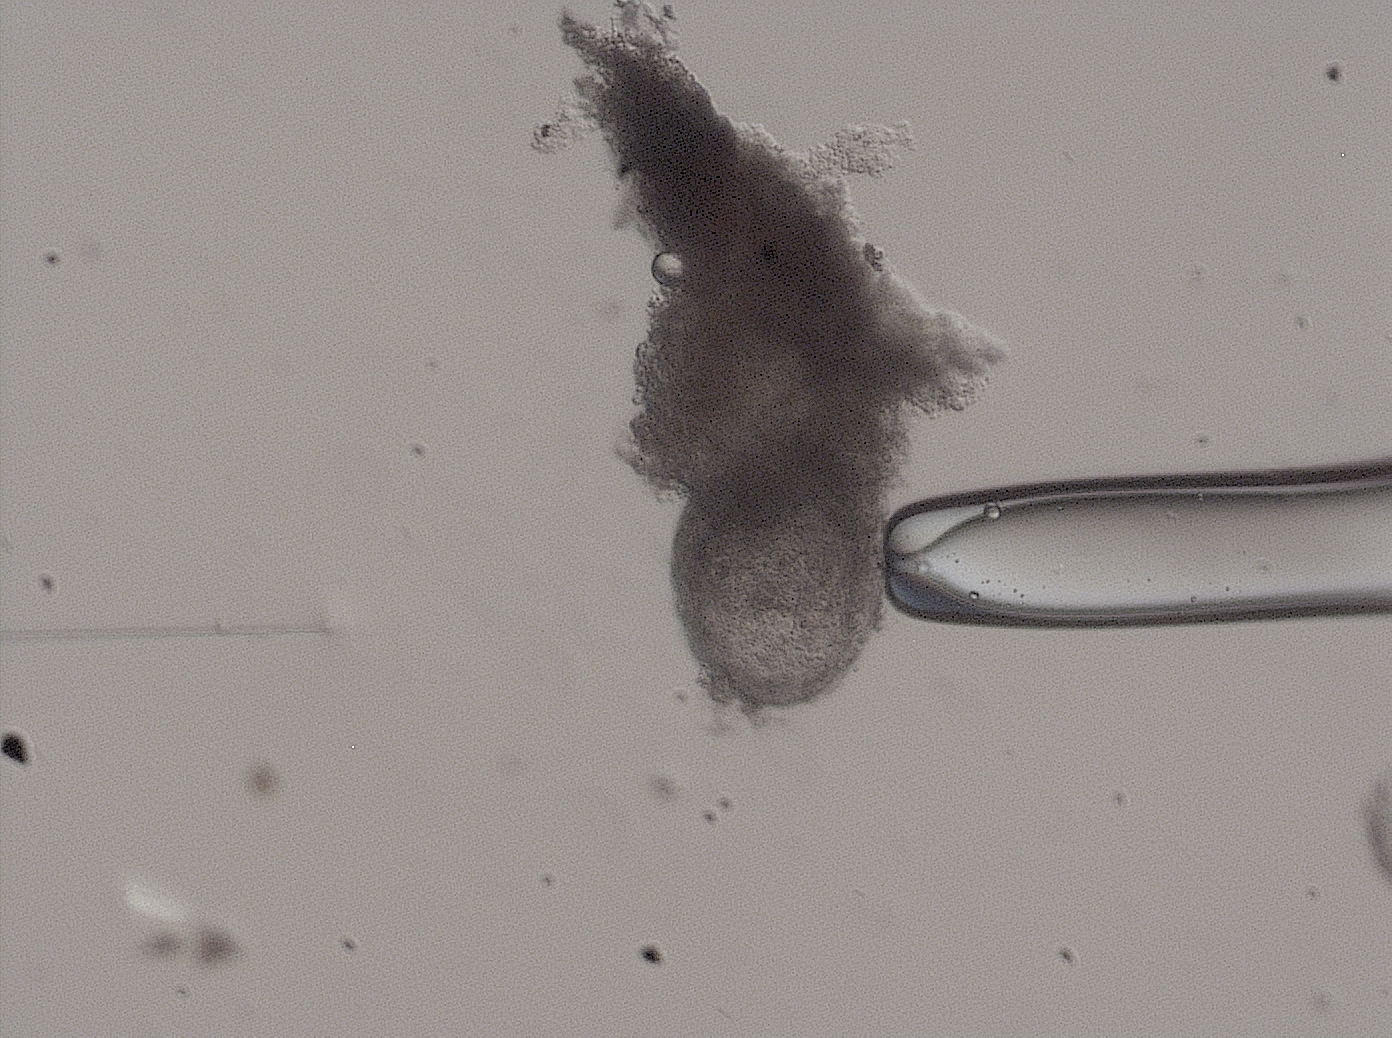 Image of a 6.5 day post coital embryo (6.5 dpc) in a microinjection session with Cre-recombinase